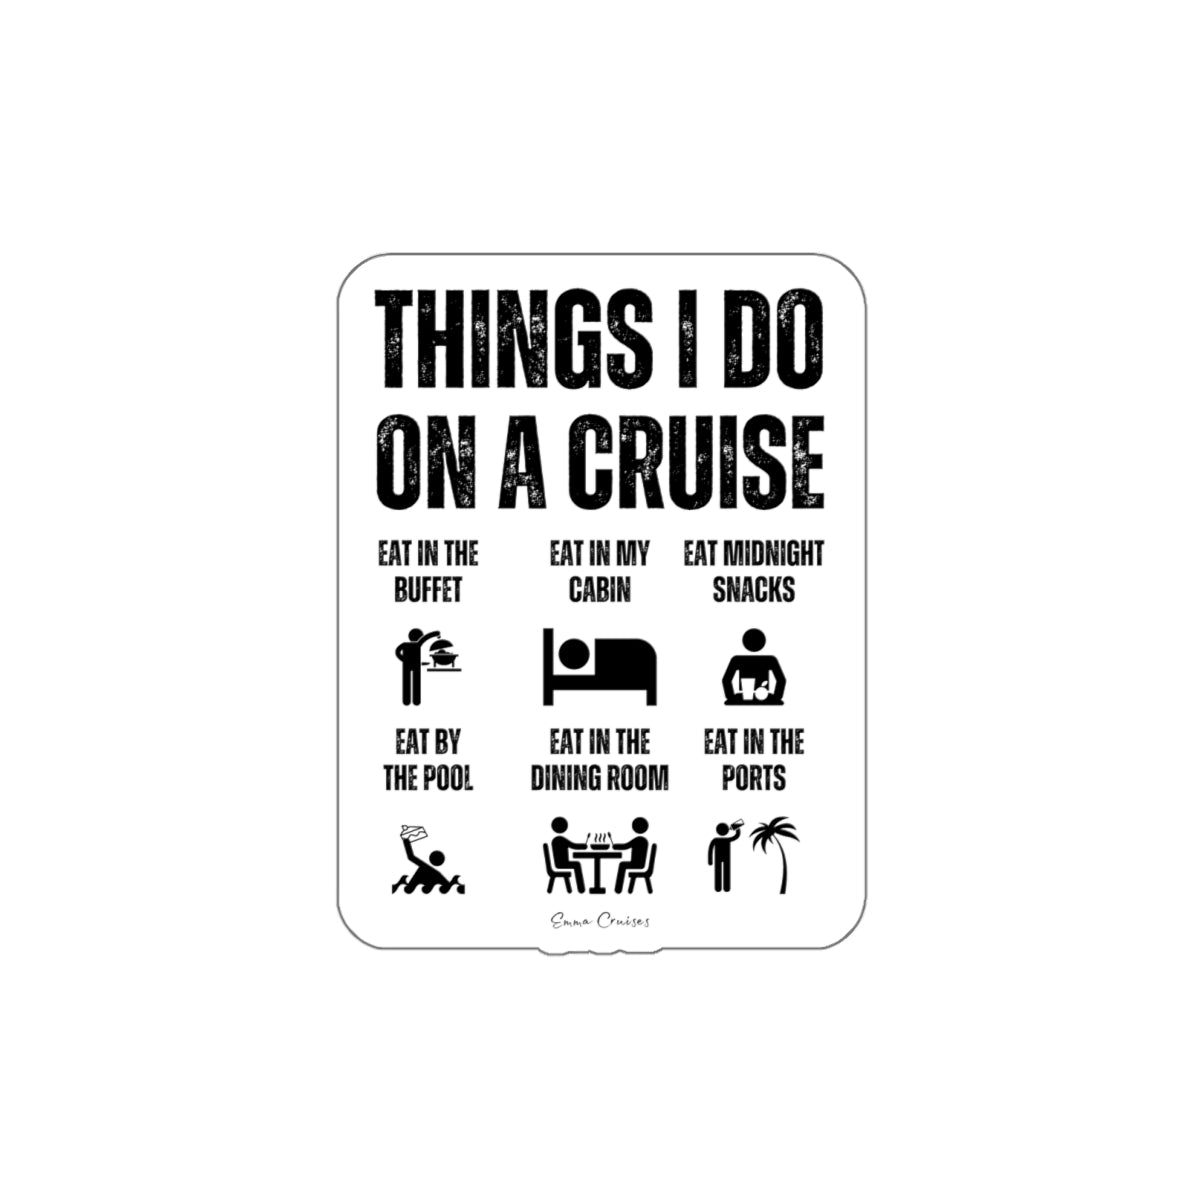 Things I Do on a Cruise - Die-Cut Sticker